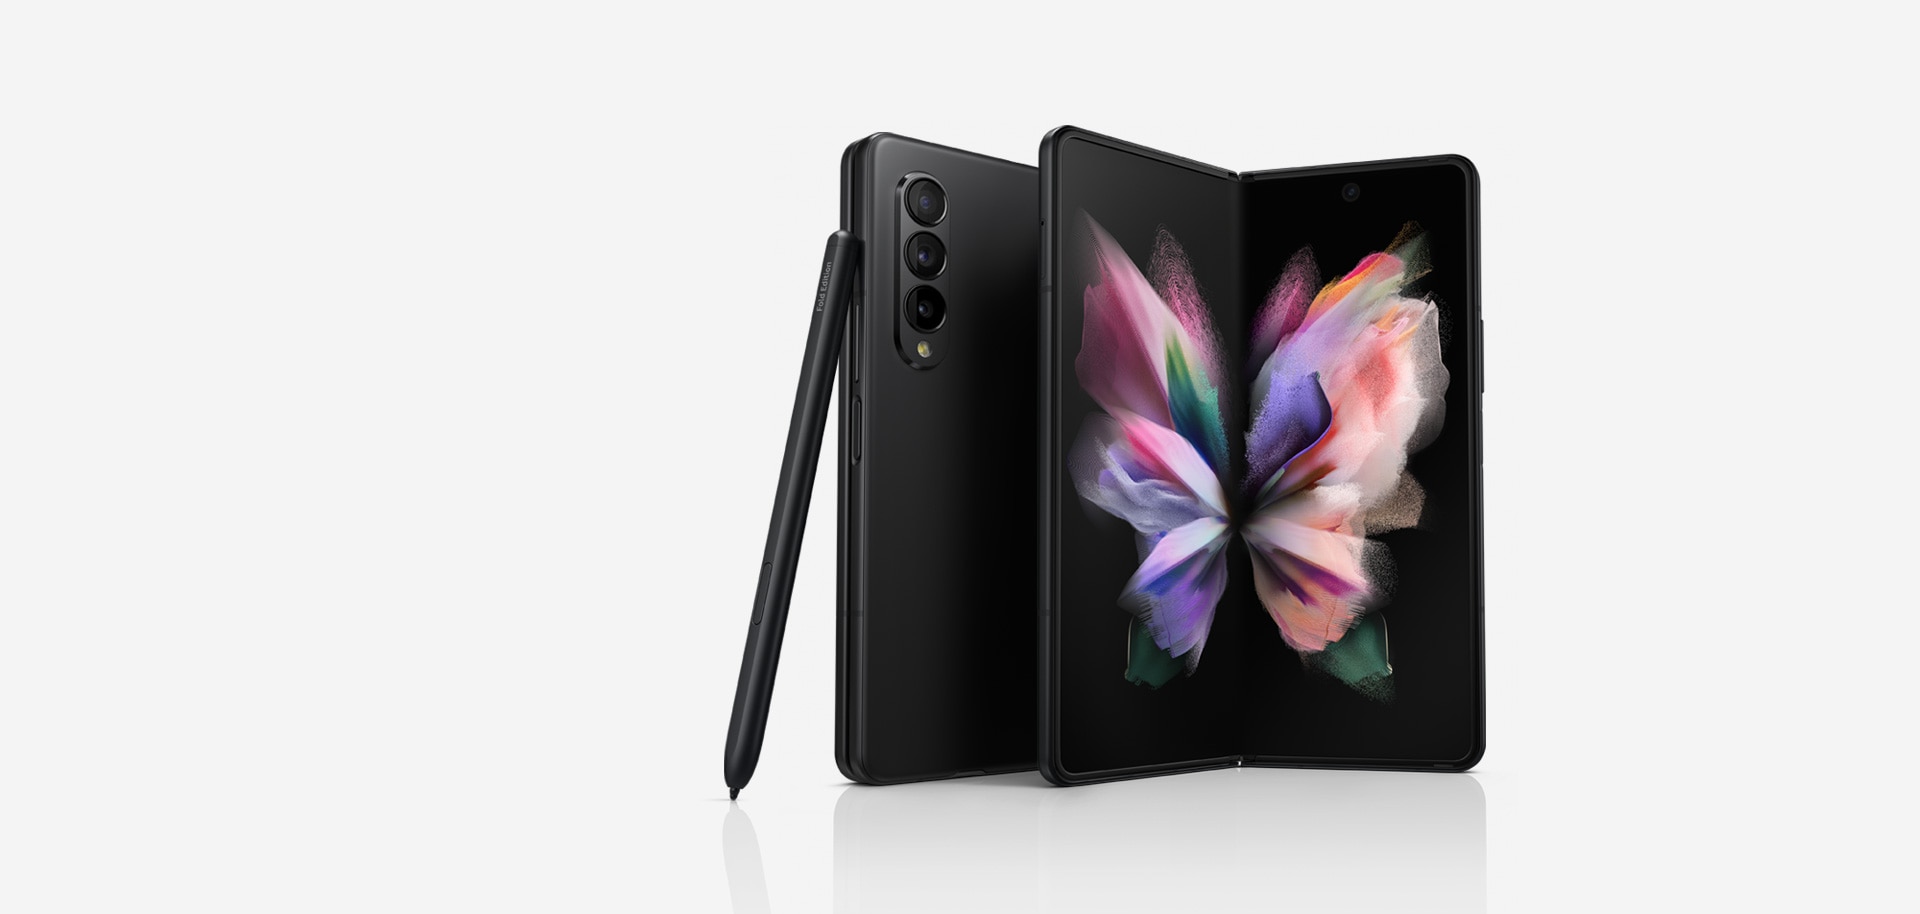 Two Galaxy Z Fold3 5G phones, one seen folded from the Back Cover and one seen unfolded with a colourful wallpaper on the Main Screen. The S Pen Fold Edition leans against the folded phone.